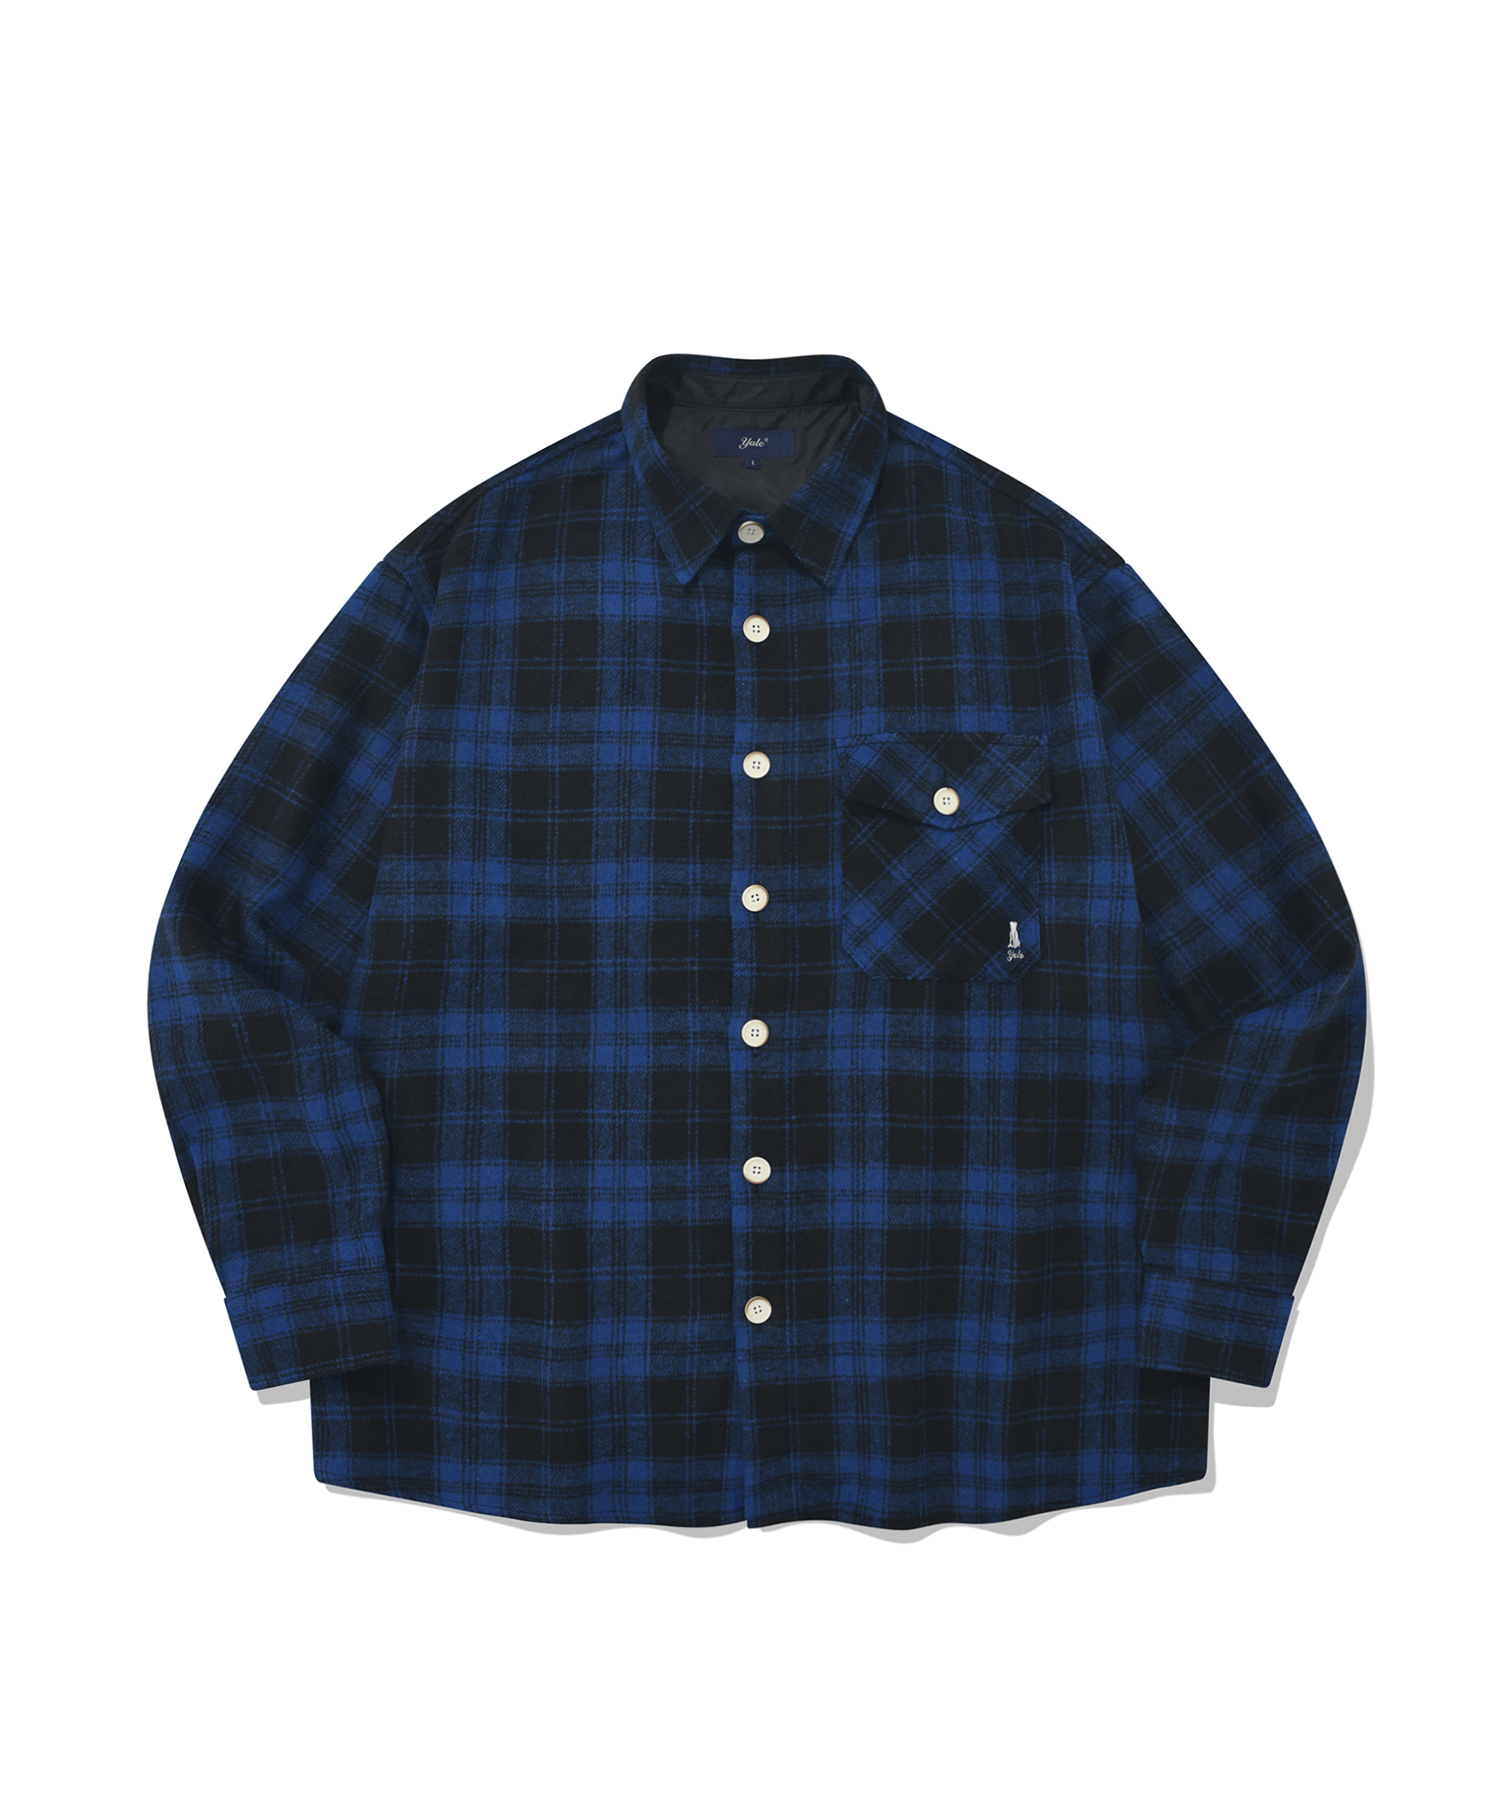 HEAVY FLANNEL ONE POCKET CHECK SHIRT BLUE